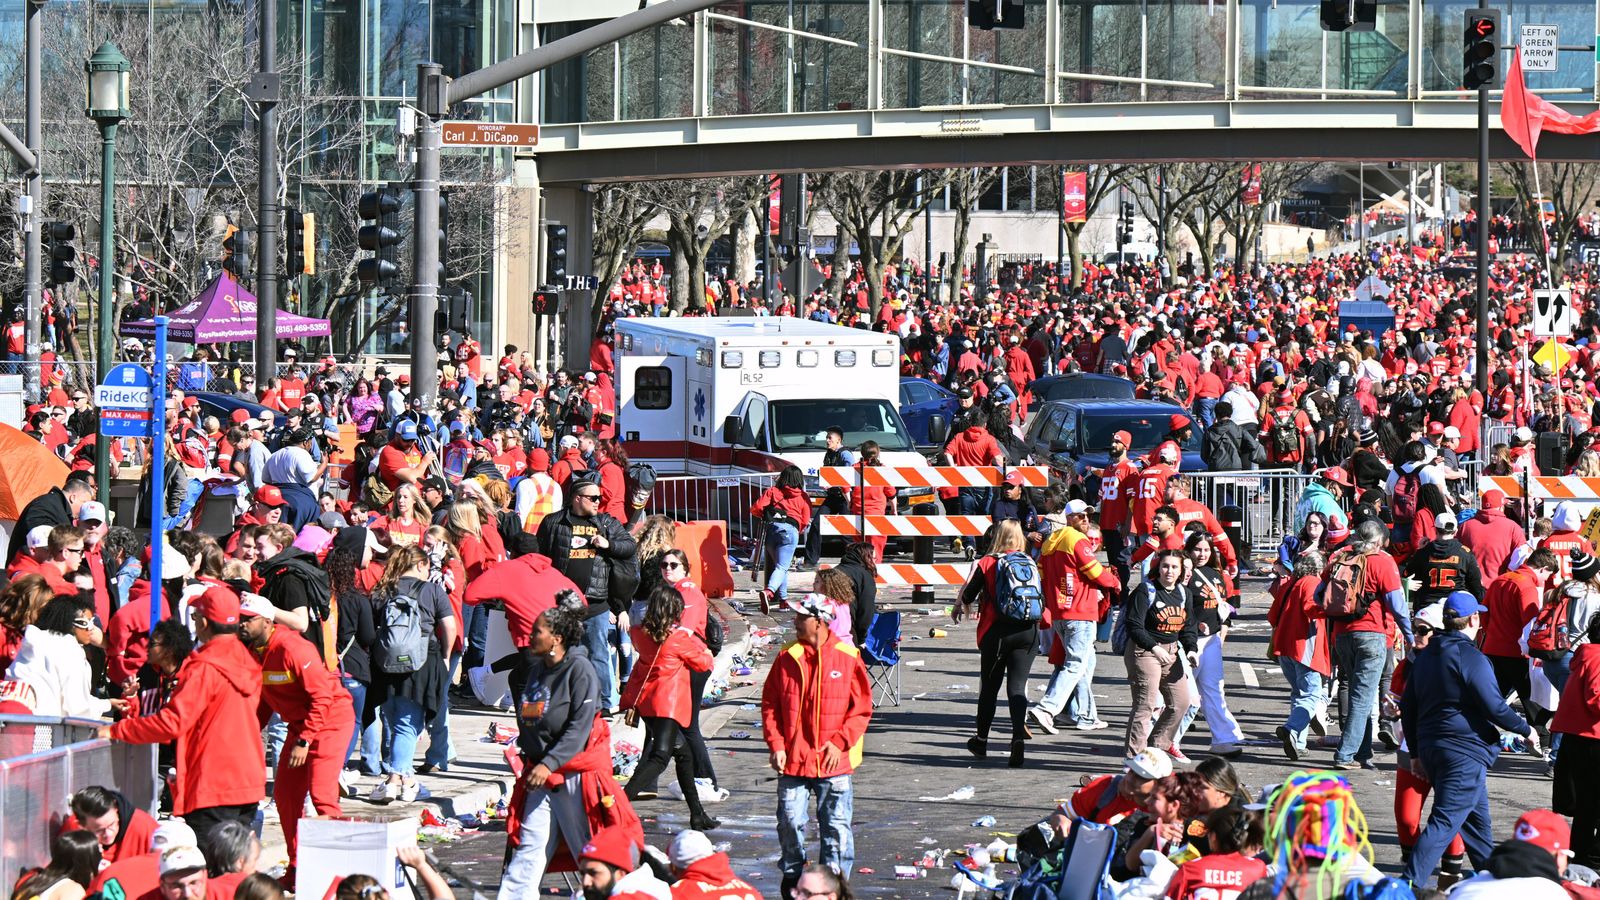 Kansas City Chiefs' Super Bowl parade shooting leaves one dead and 21 injured